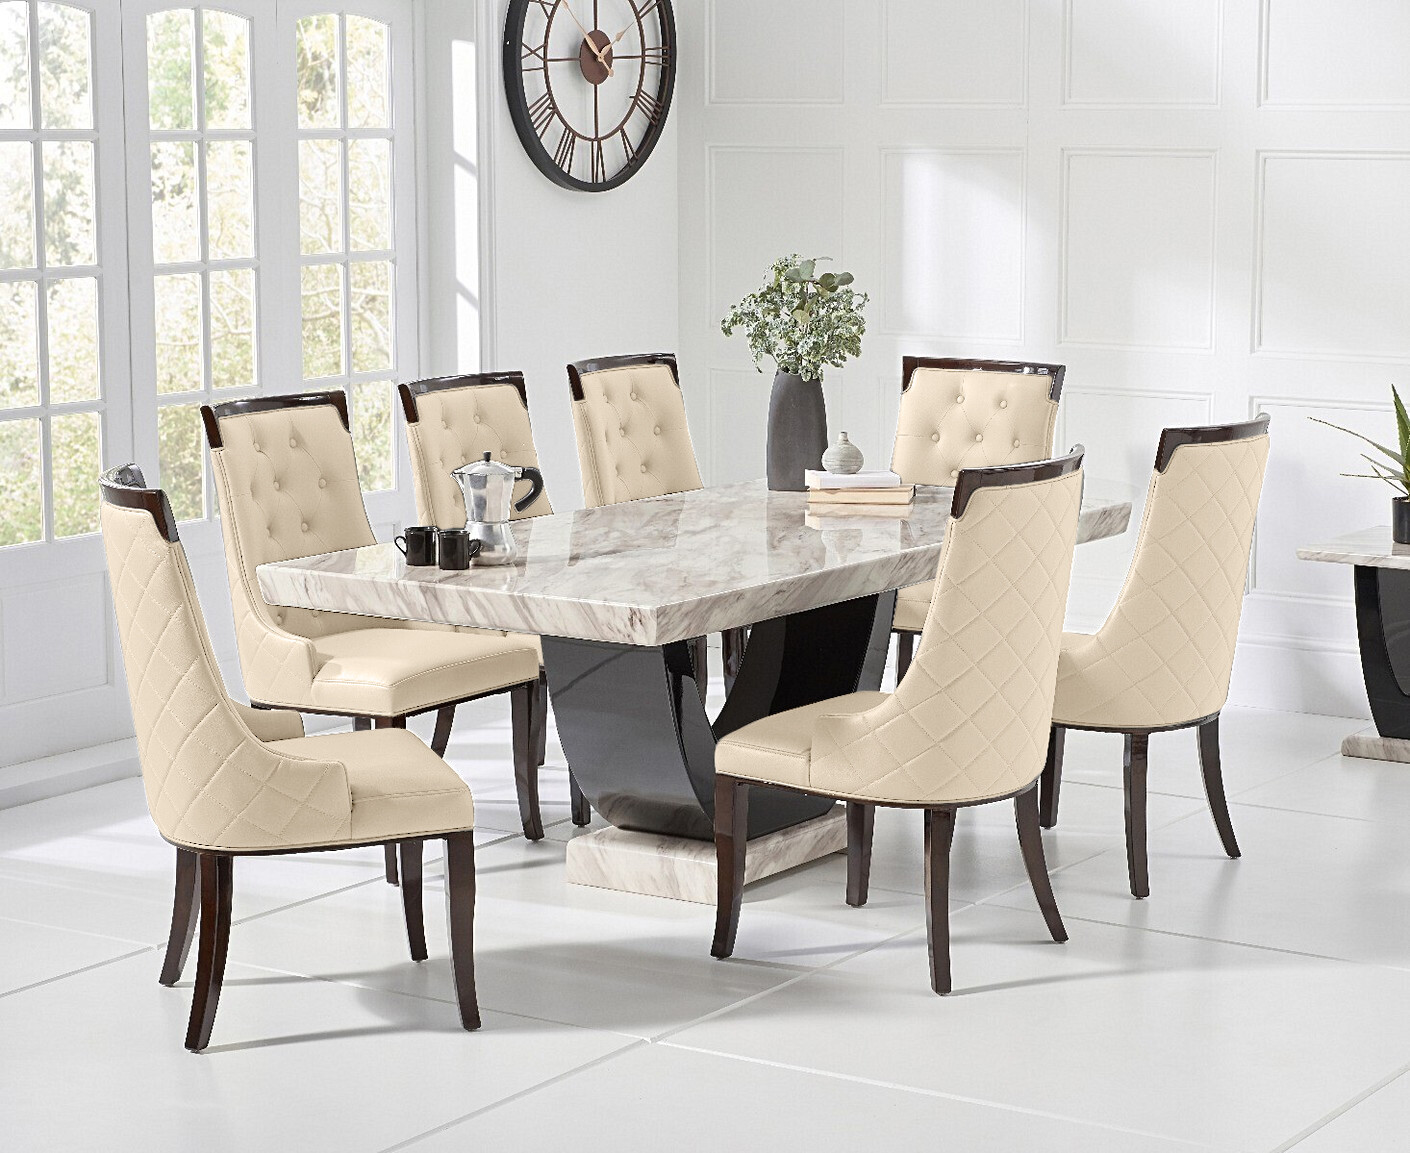 Photo 2 of Novara 200cm cream and black pedestal marble dining table with 10 grey francesca chairs